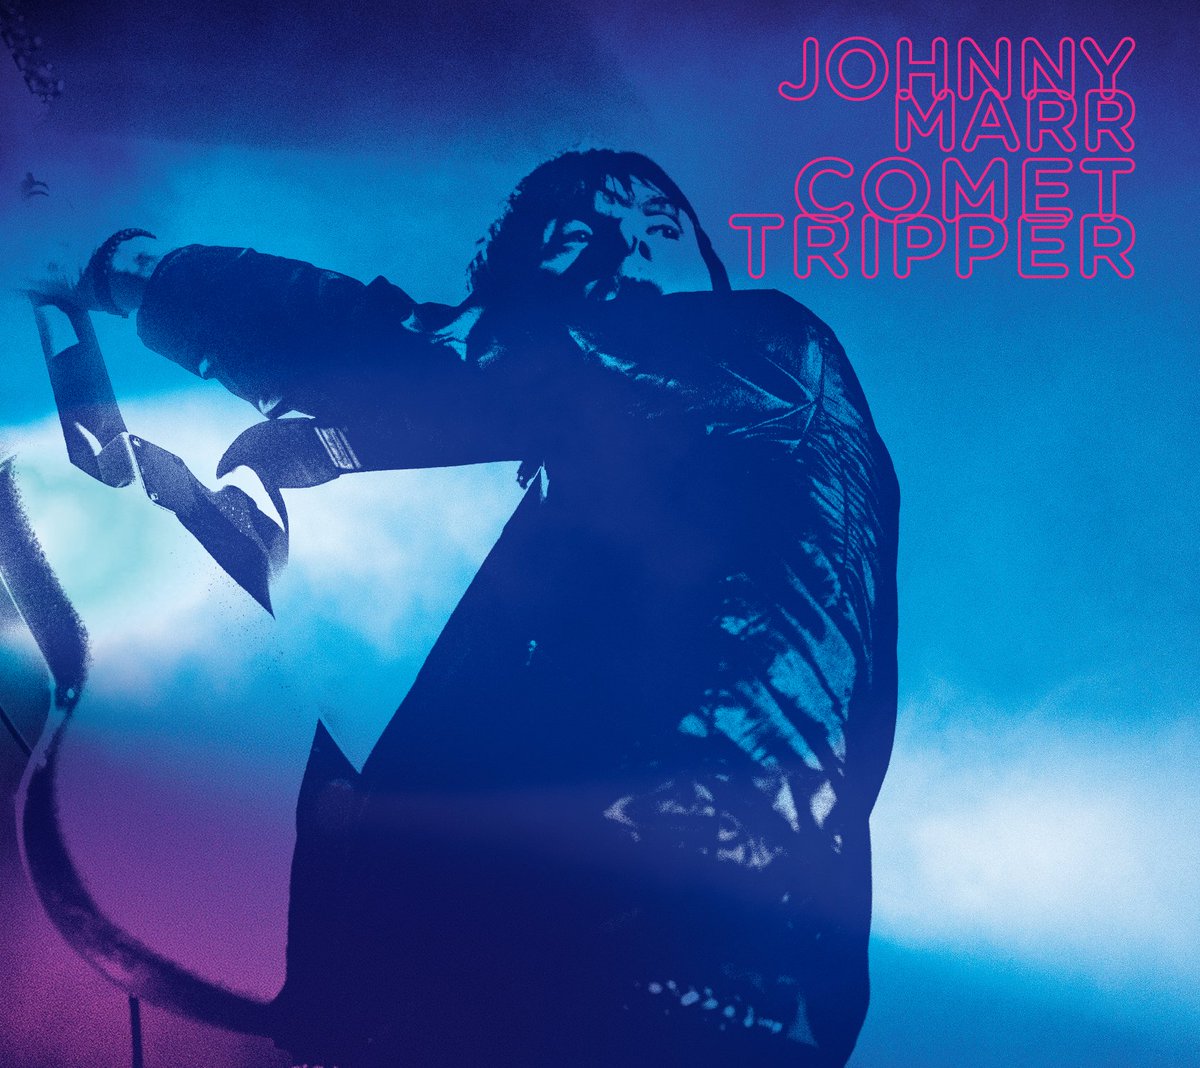 Johnny Marr - Comet Tripper - Live At The Roundhouse - 2018  Download MP3 or WAV